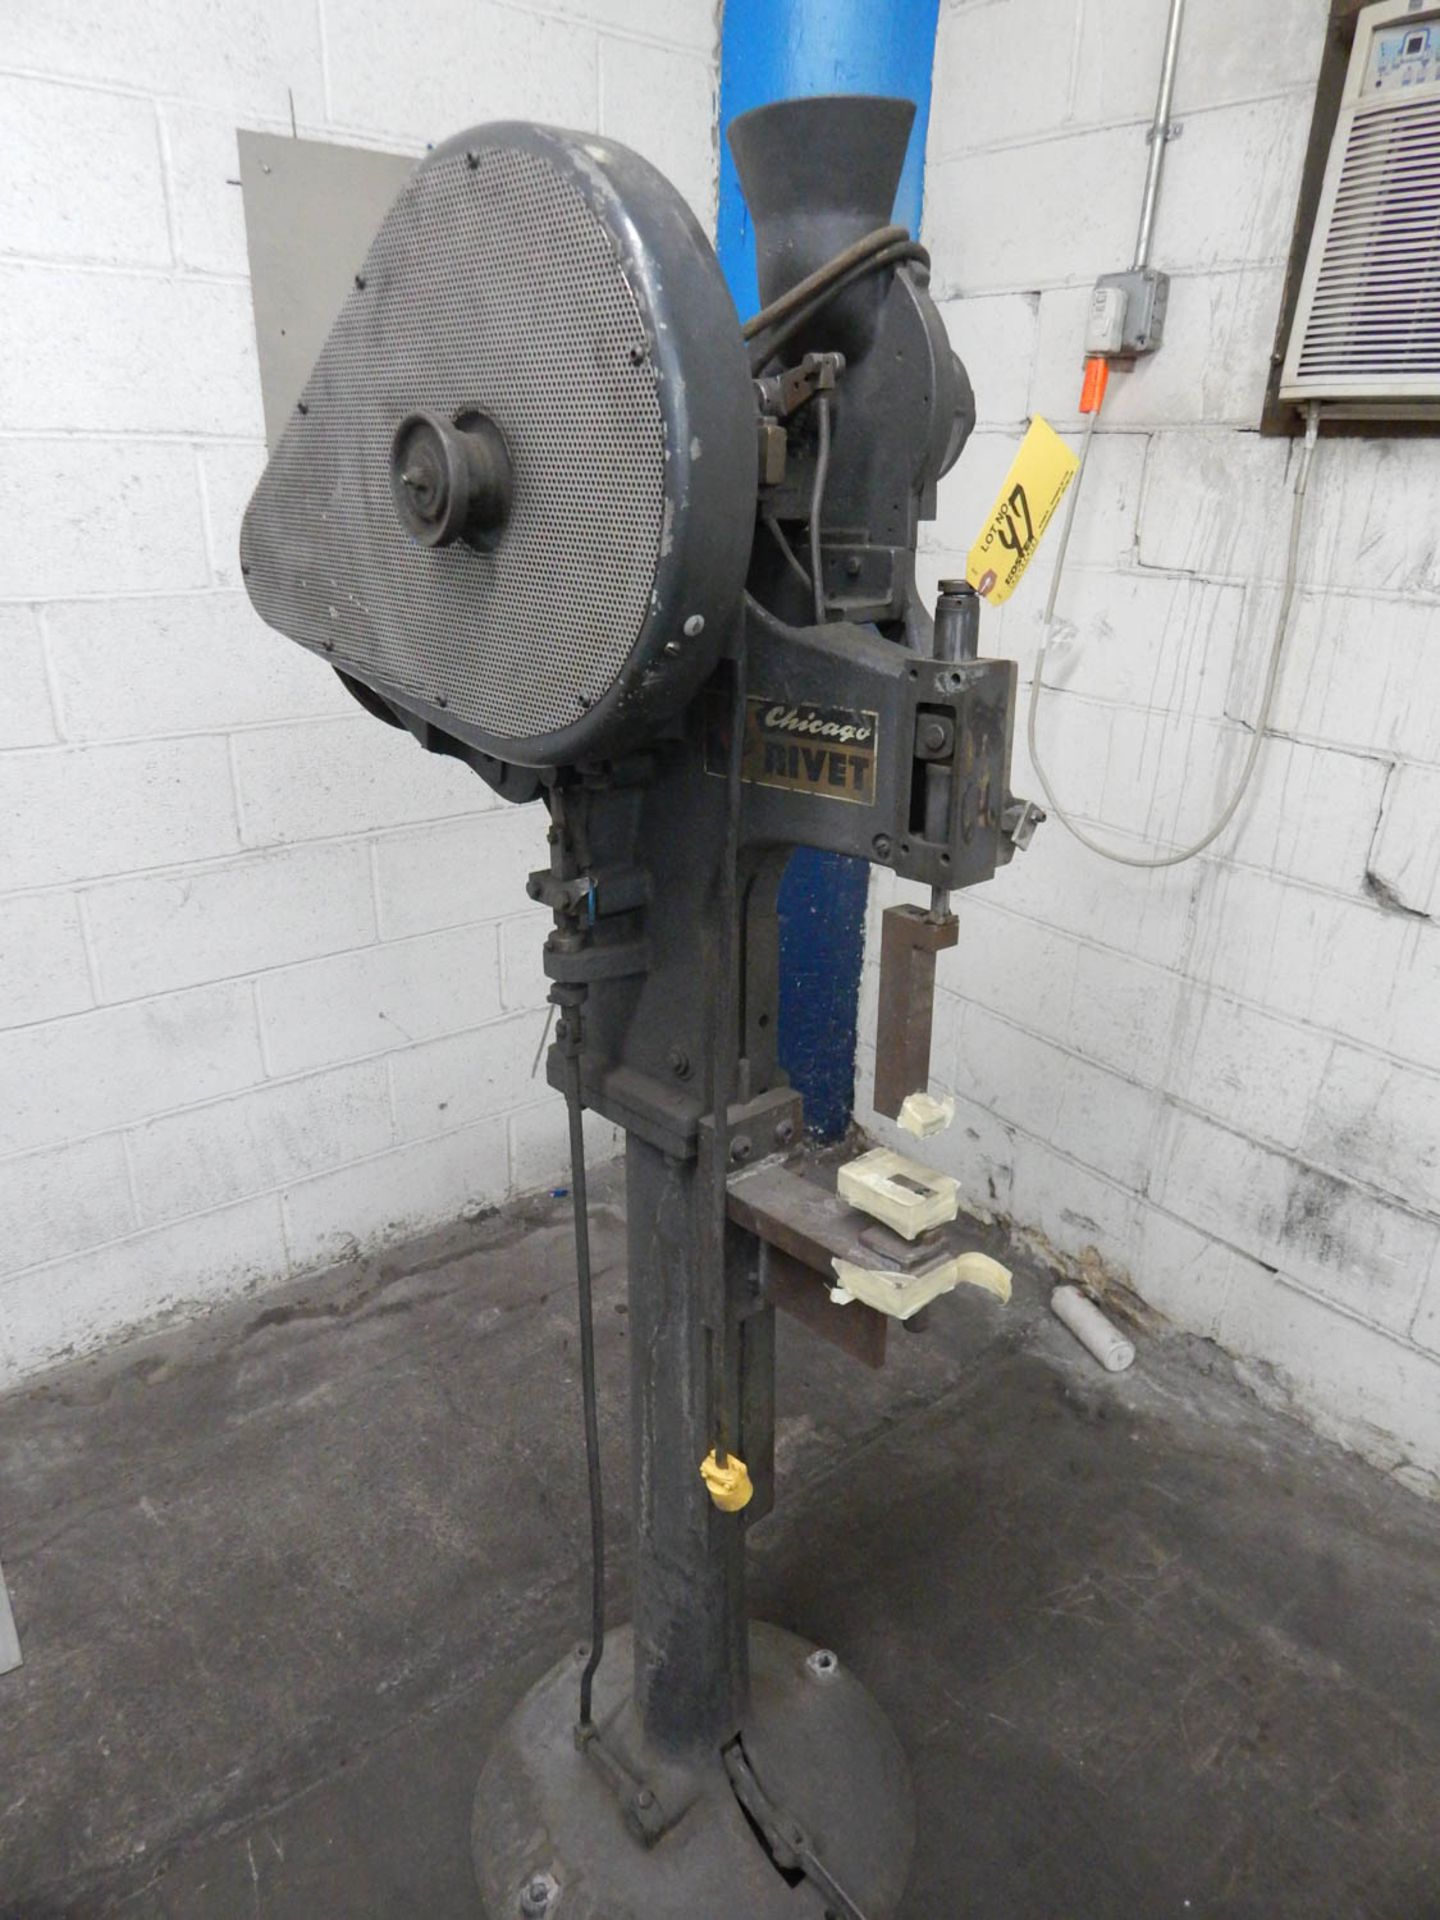 CHICAGO RIVET & MACHINE FLOOR TYPE HOPPER, SINGLE PHASE, WITH 1/8'' CAPACITY, S/N: 13-8134 - Image 2 of 2